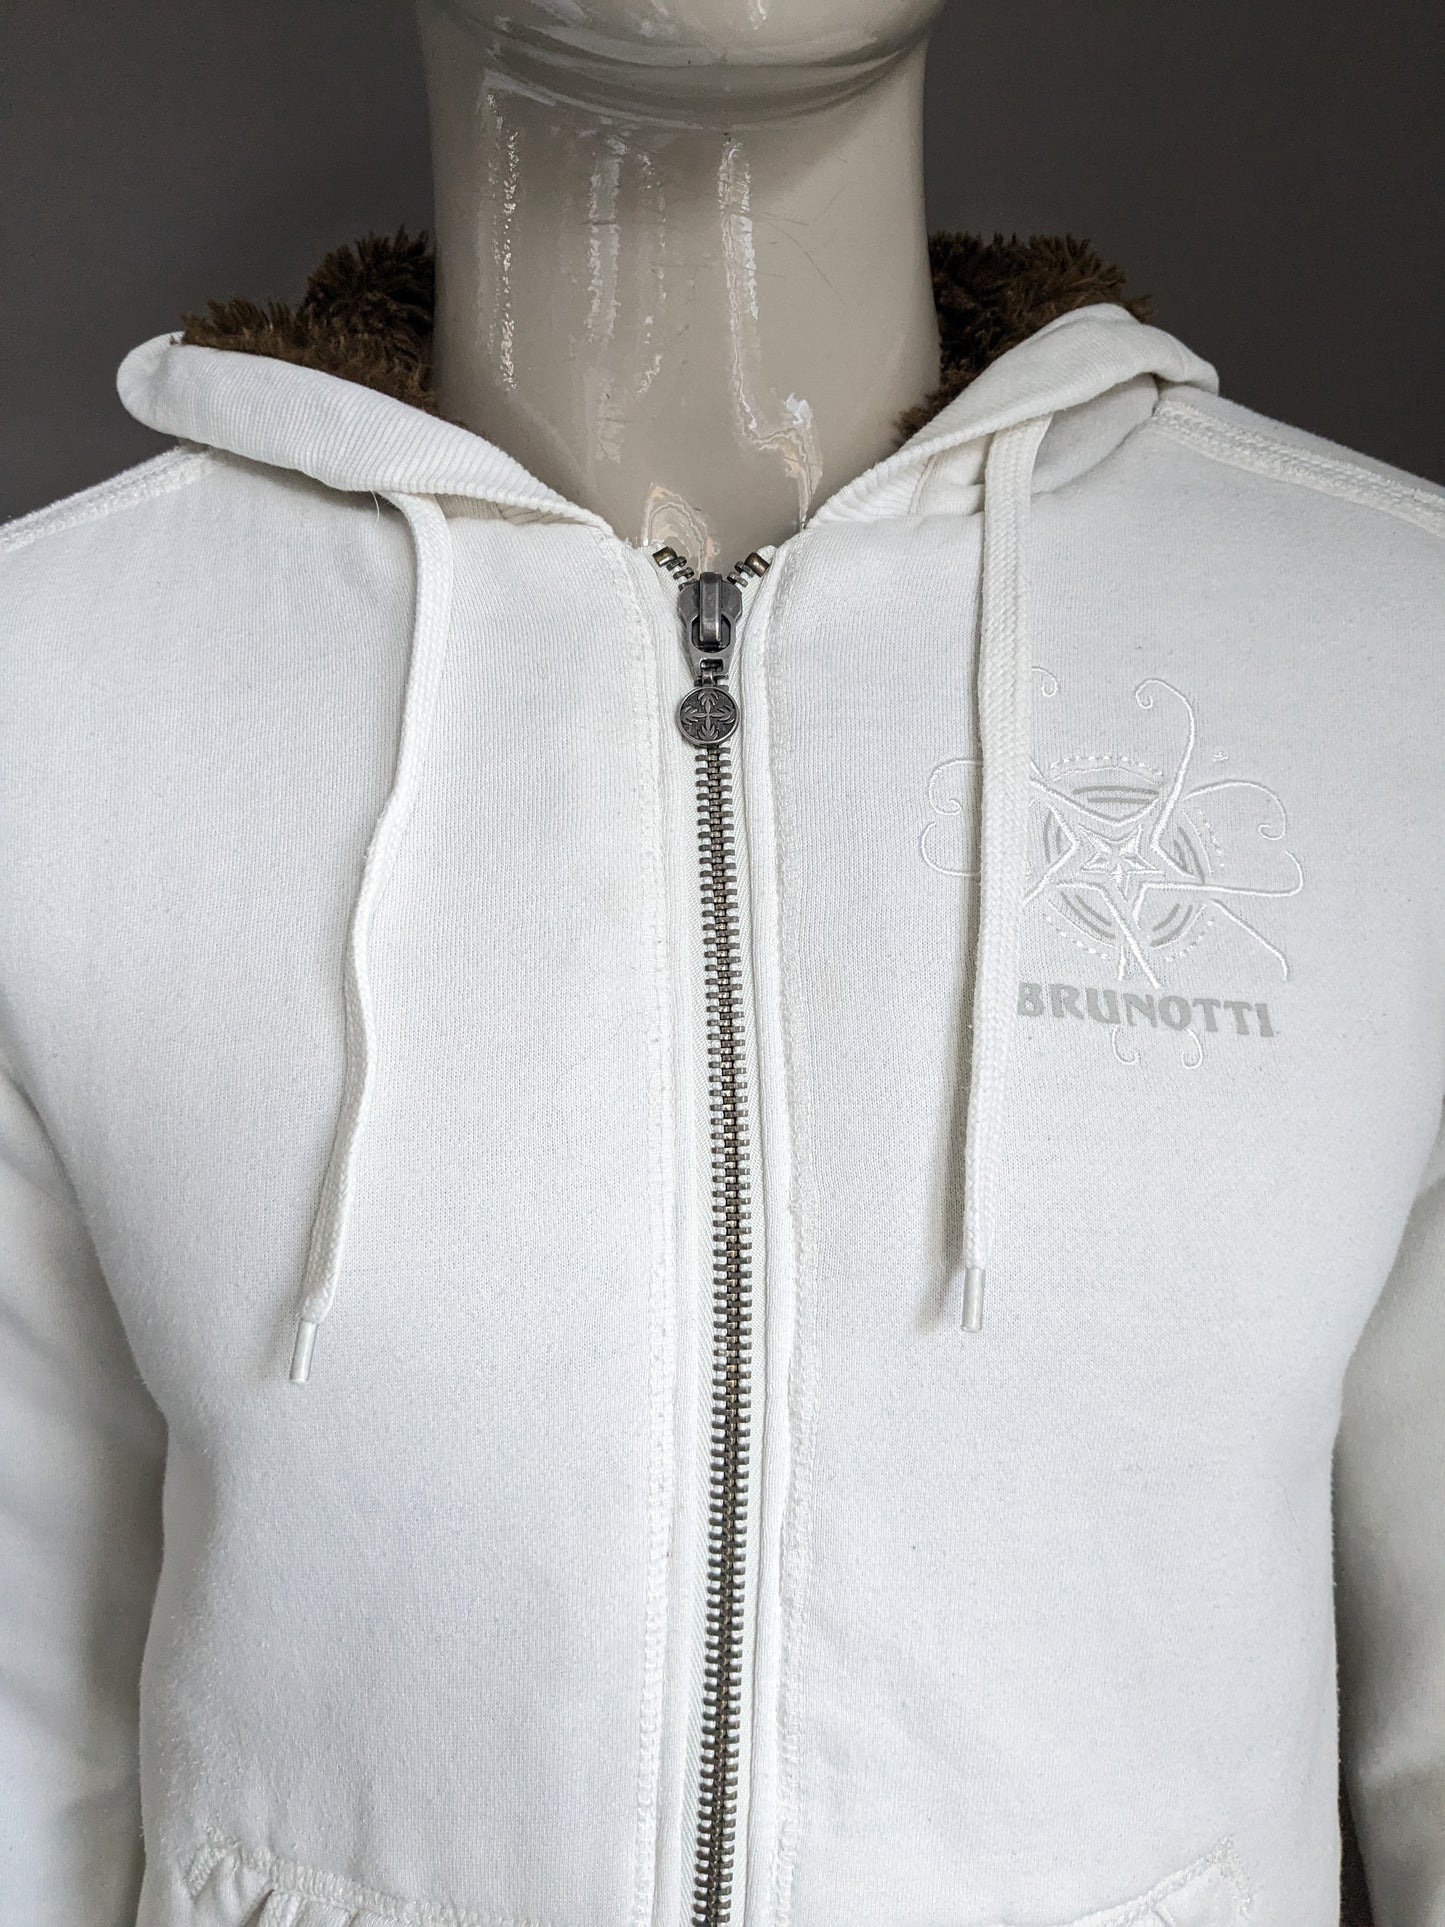 Brunotti thickly lined hot cardigan with hood. White. Size S.